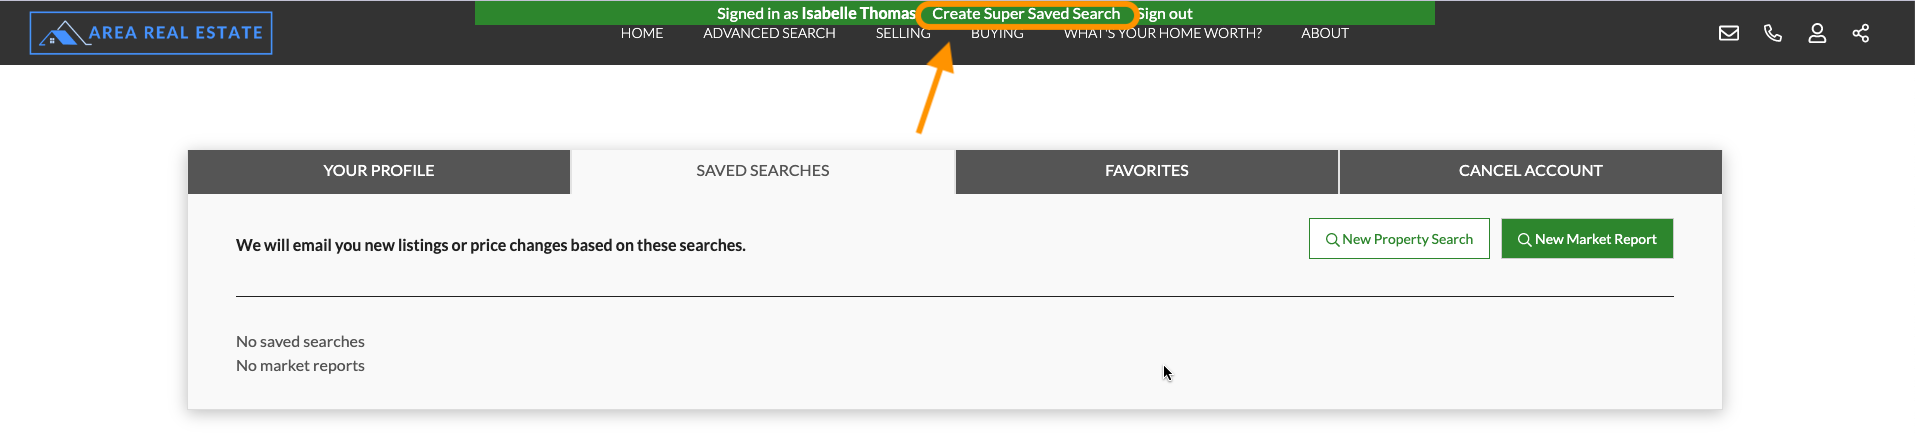 super_saved_search.png